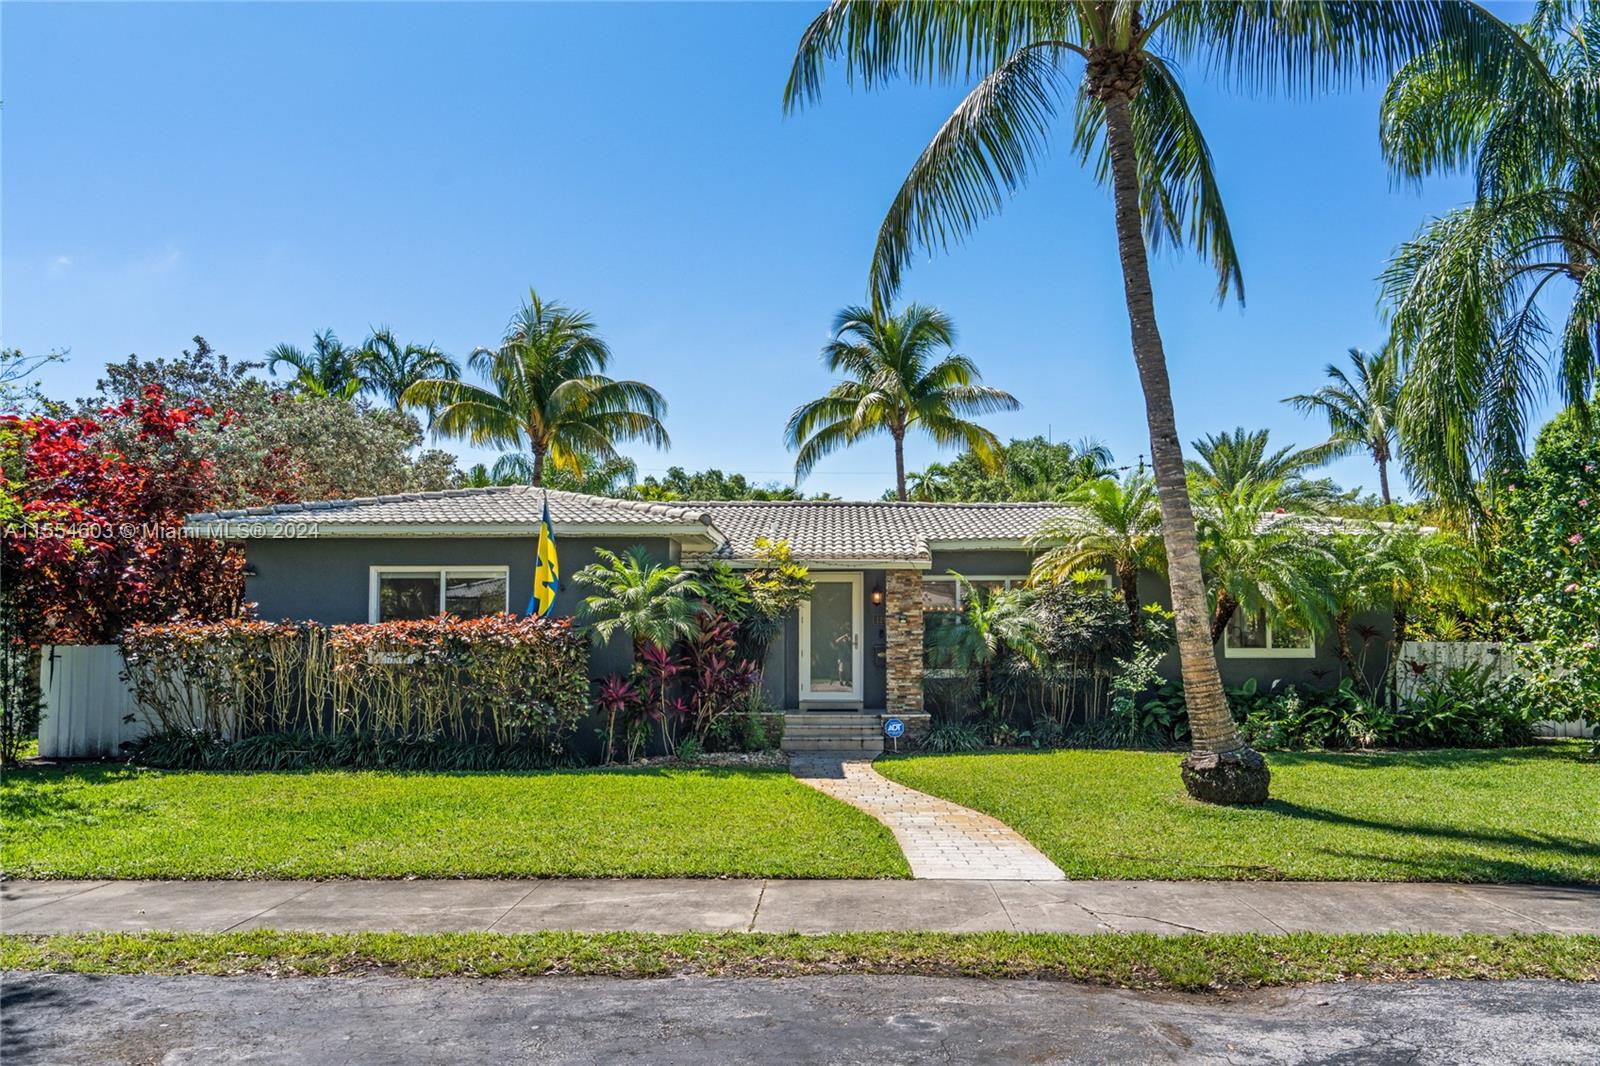 Property for Sale at 126 Ne 109th St St, Miami Shores, Miami-Dade County, Florida - Bedrooms: 3 
Bathrooms: 2  - $1,549,900